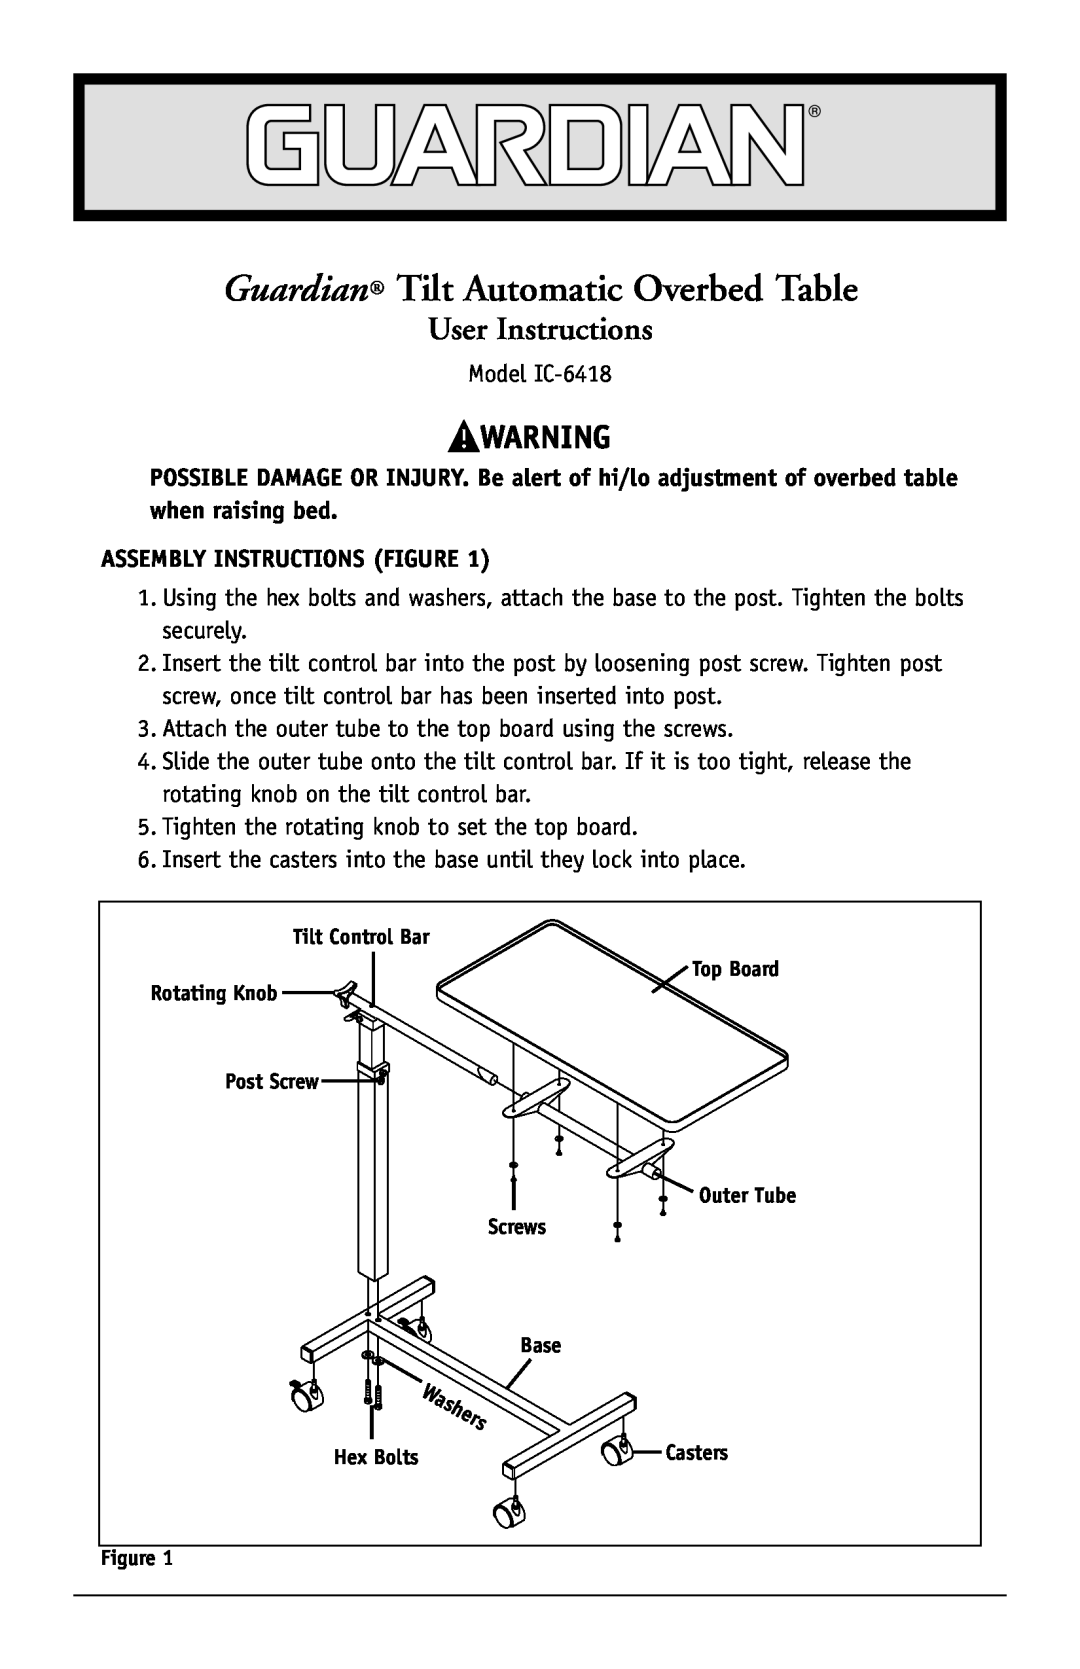 Sunrise Medical IC-6418 manual Assembly Instructions Figure, Guardian Tilt Automatic Overbed Table, User Instructions 